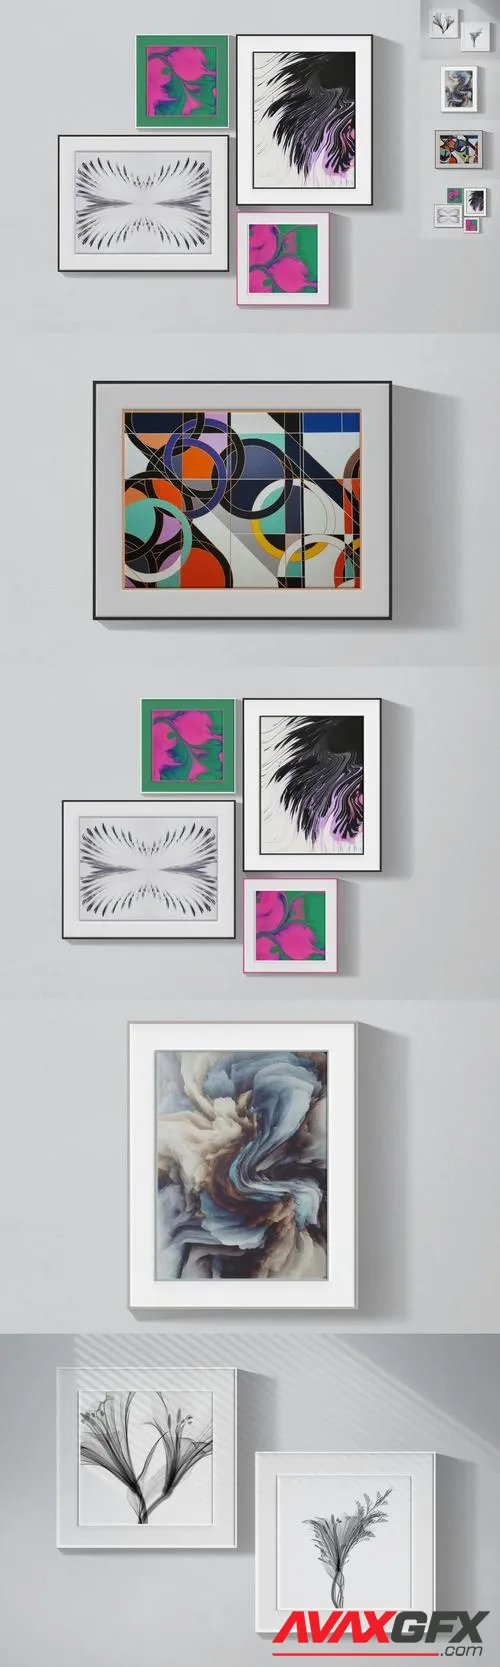 Picture / Photo Frame Mockups